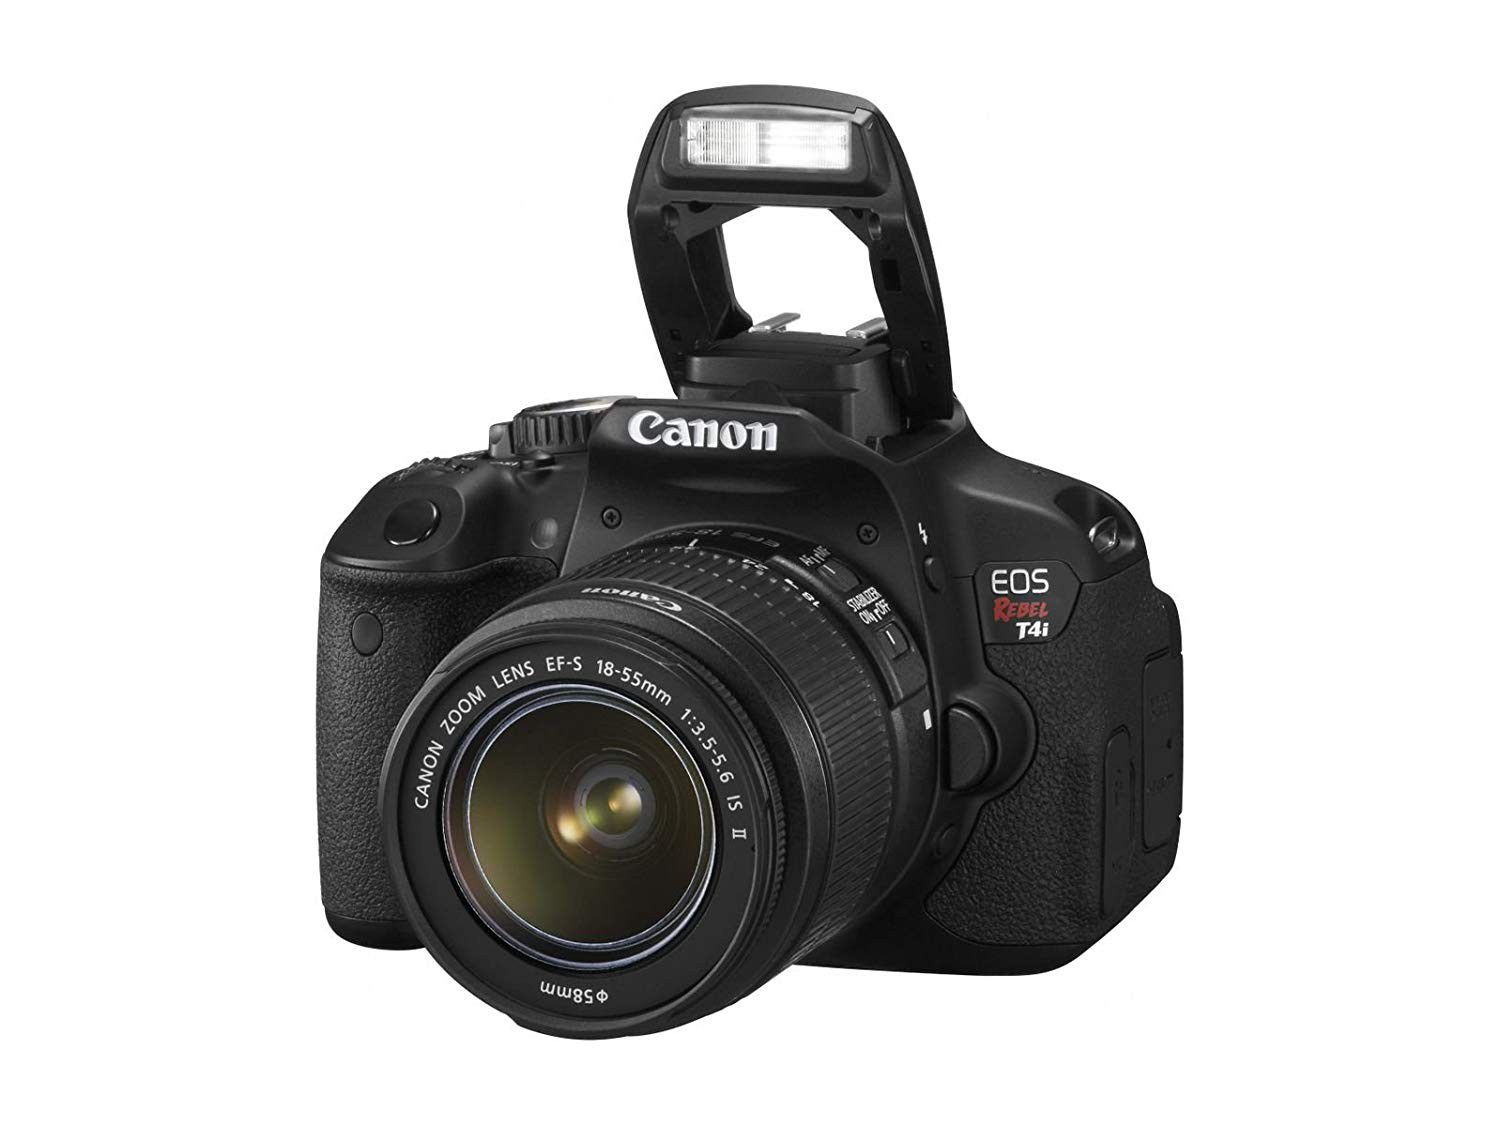 Canon T4i with lens and accessories